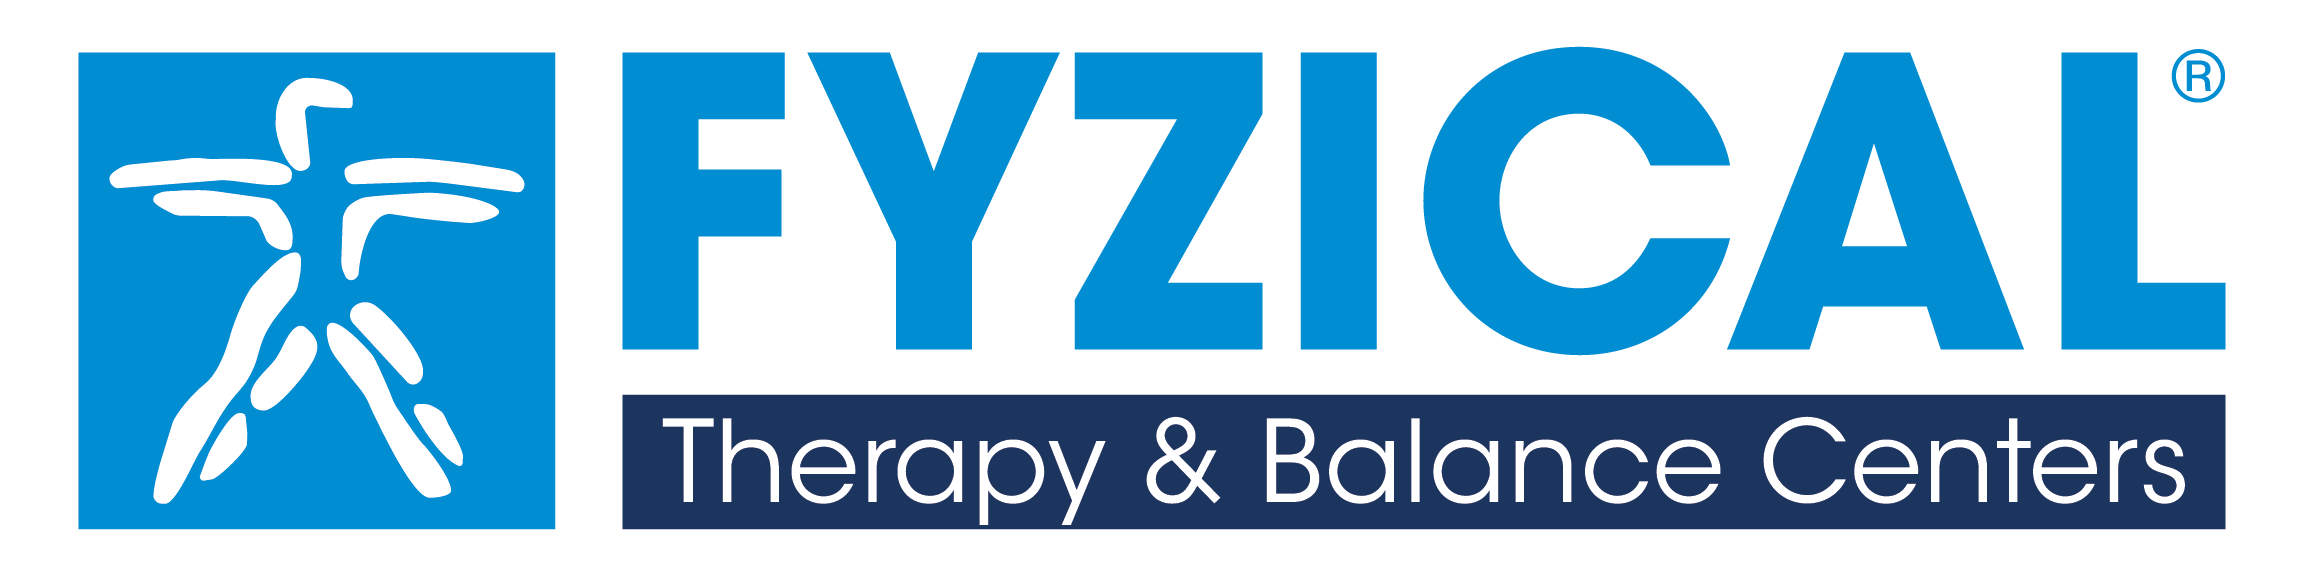 Fyzical Therapy Consultation